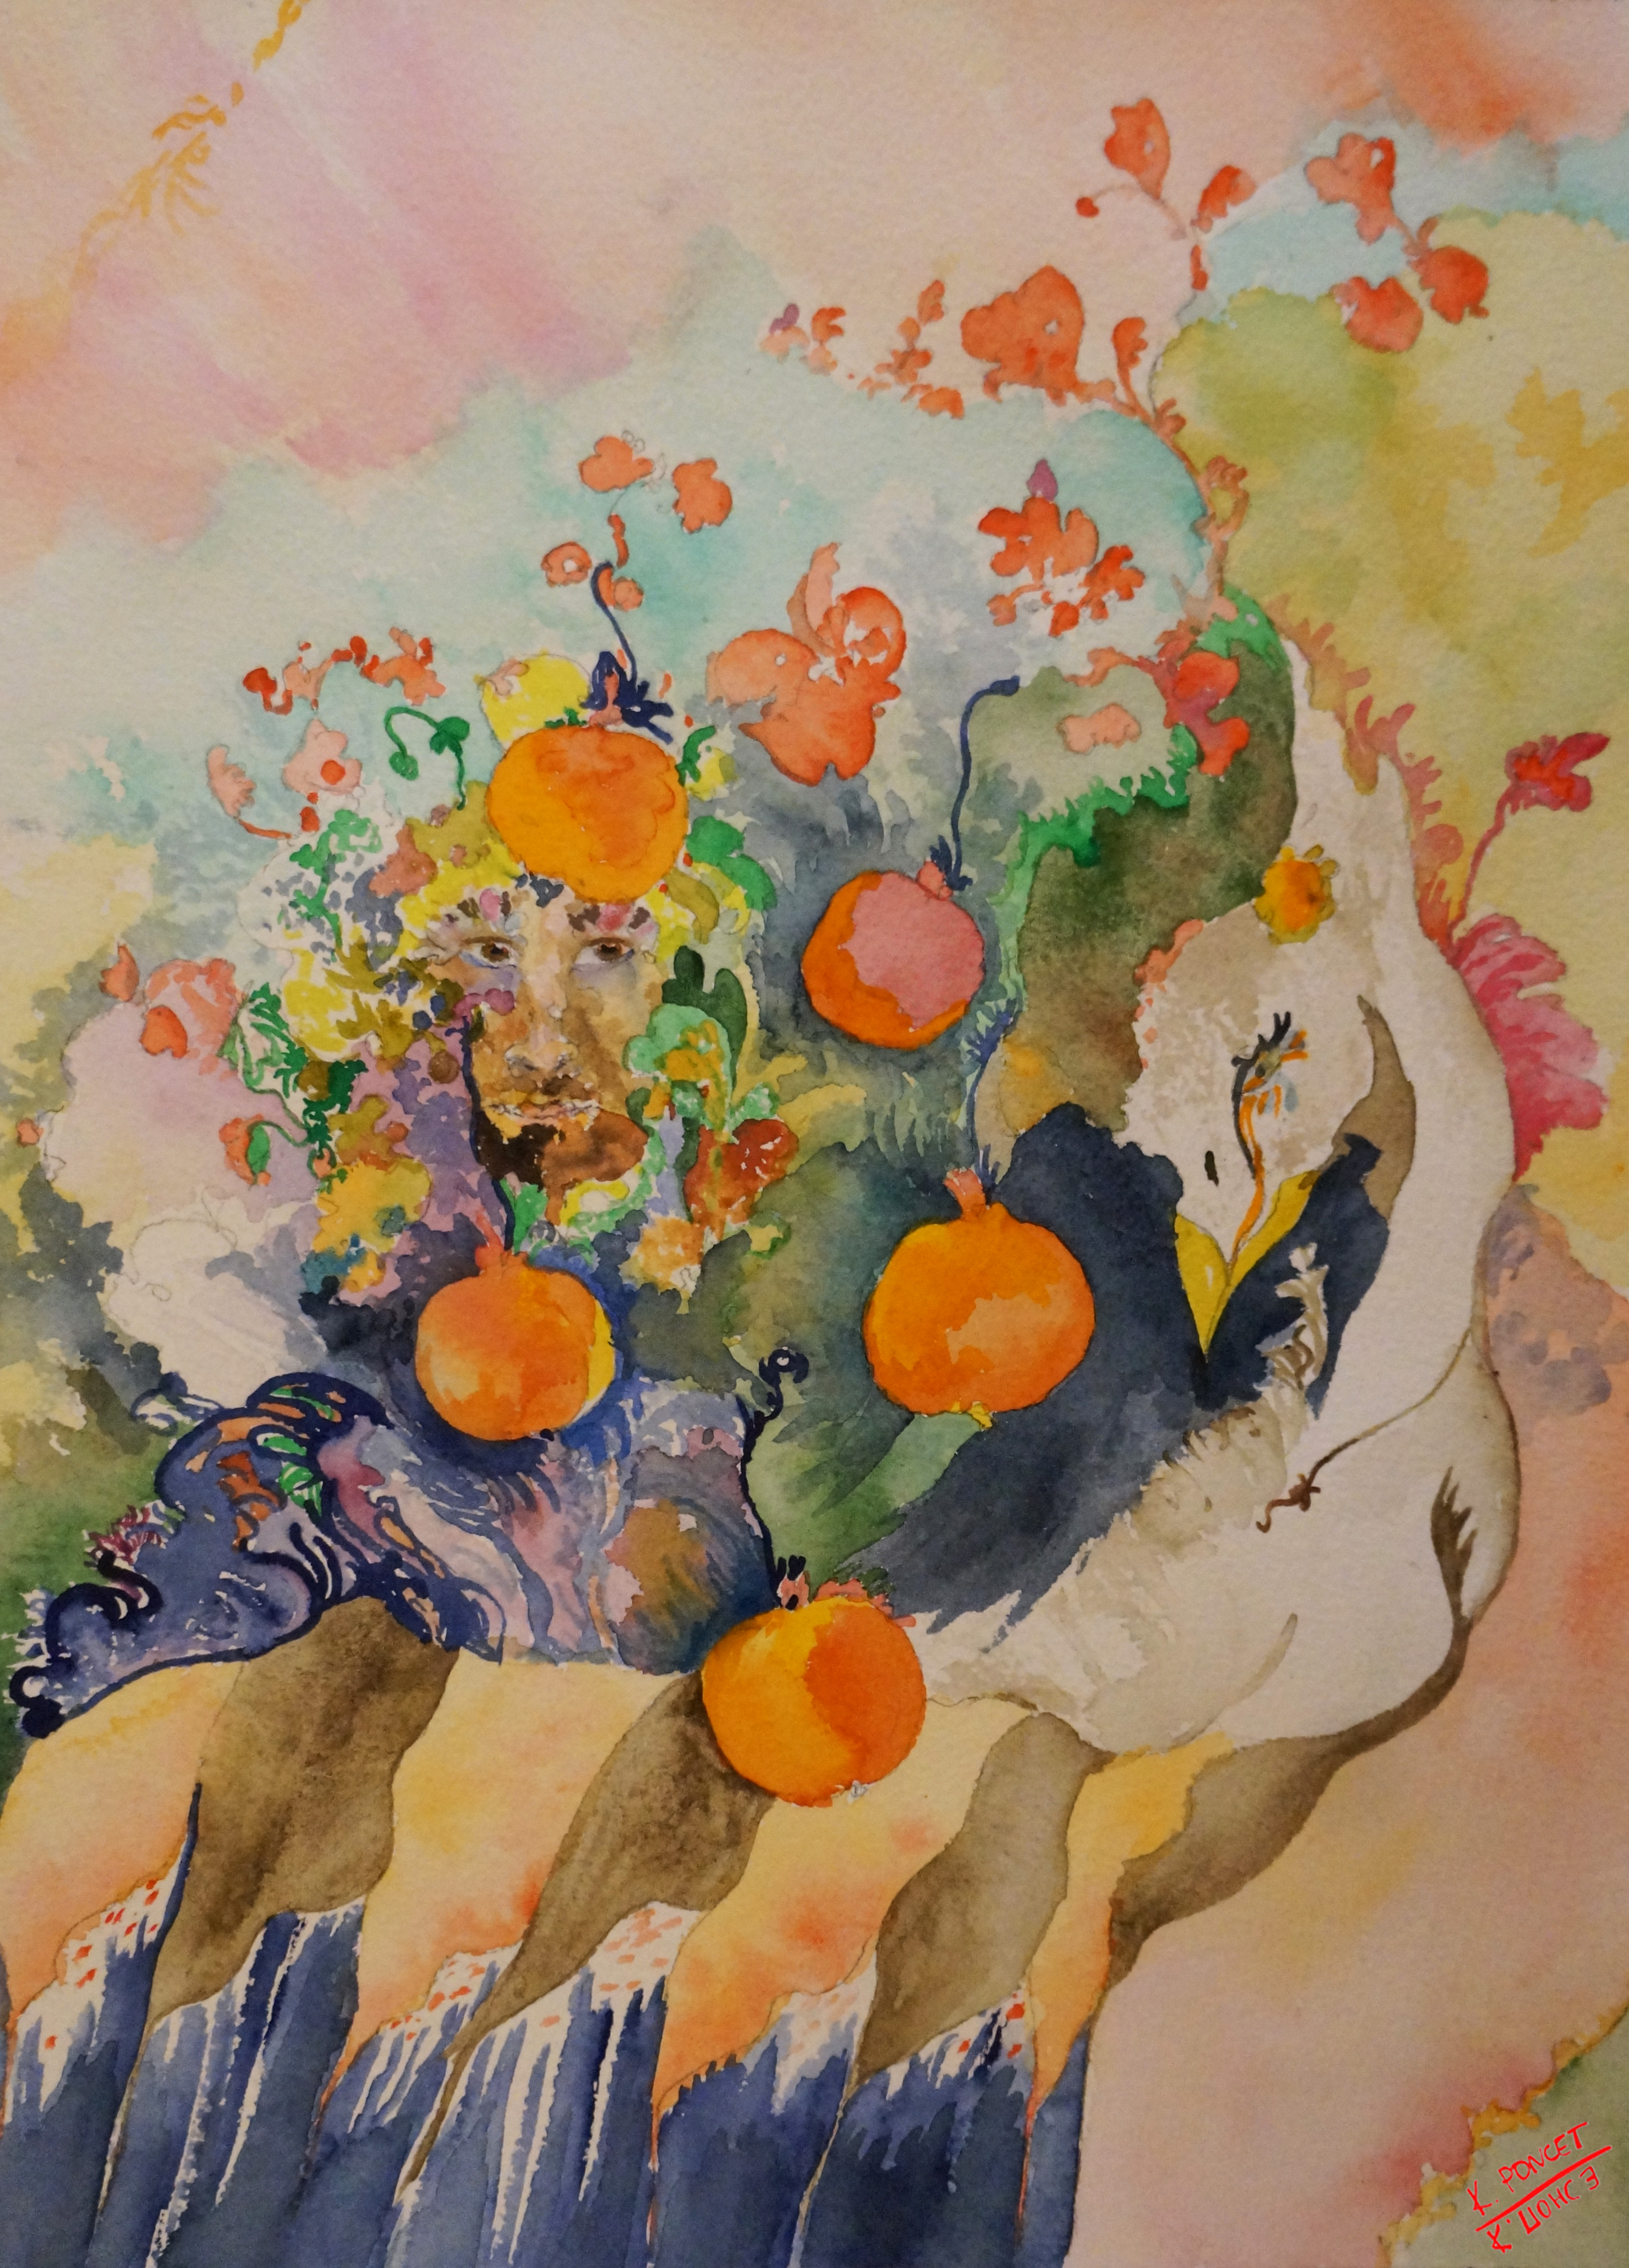 Composition with swan, human face, pomegranates and flowers